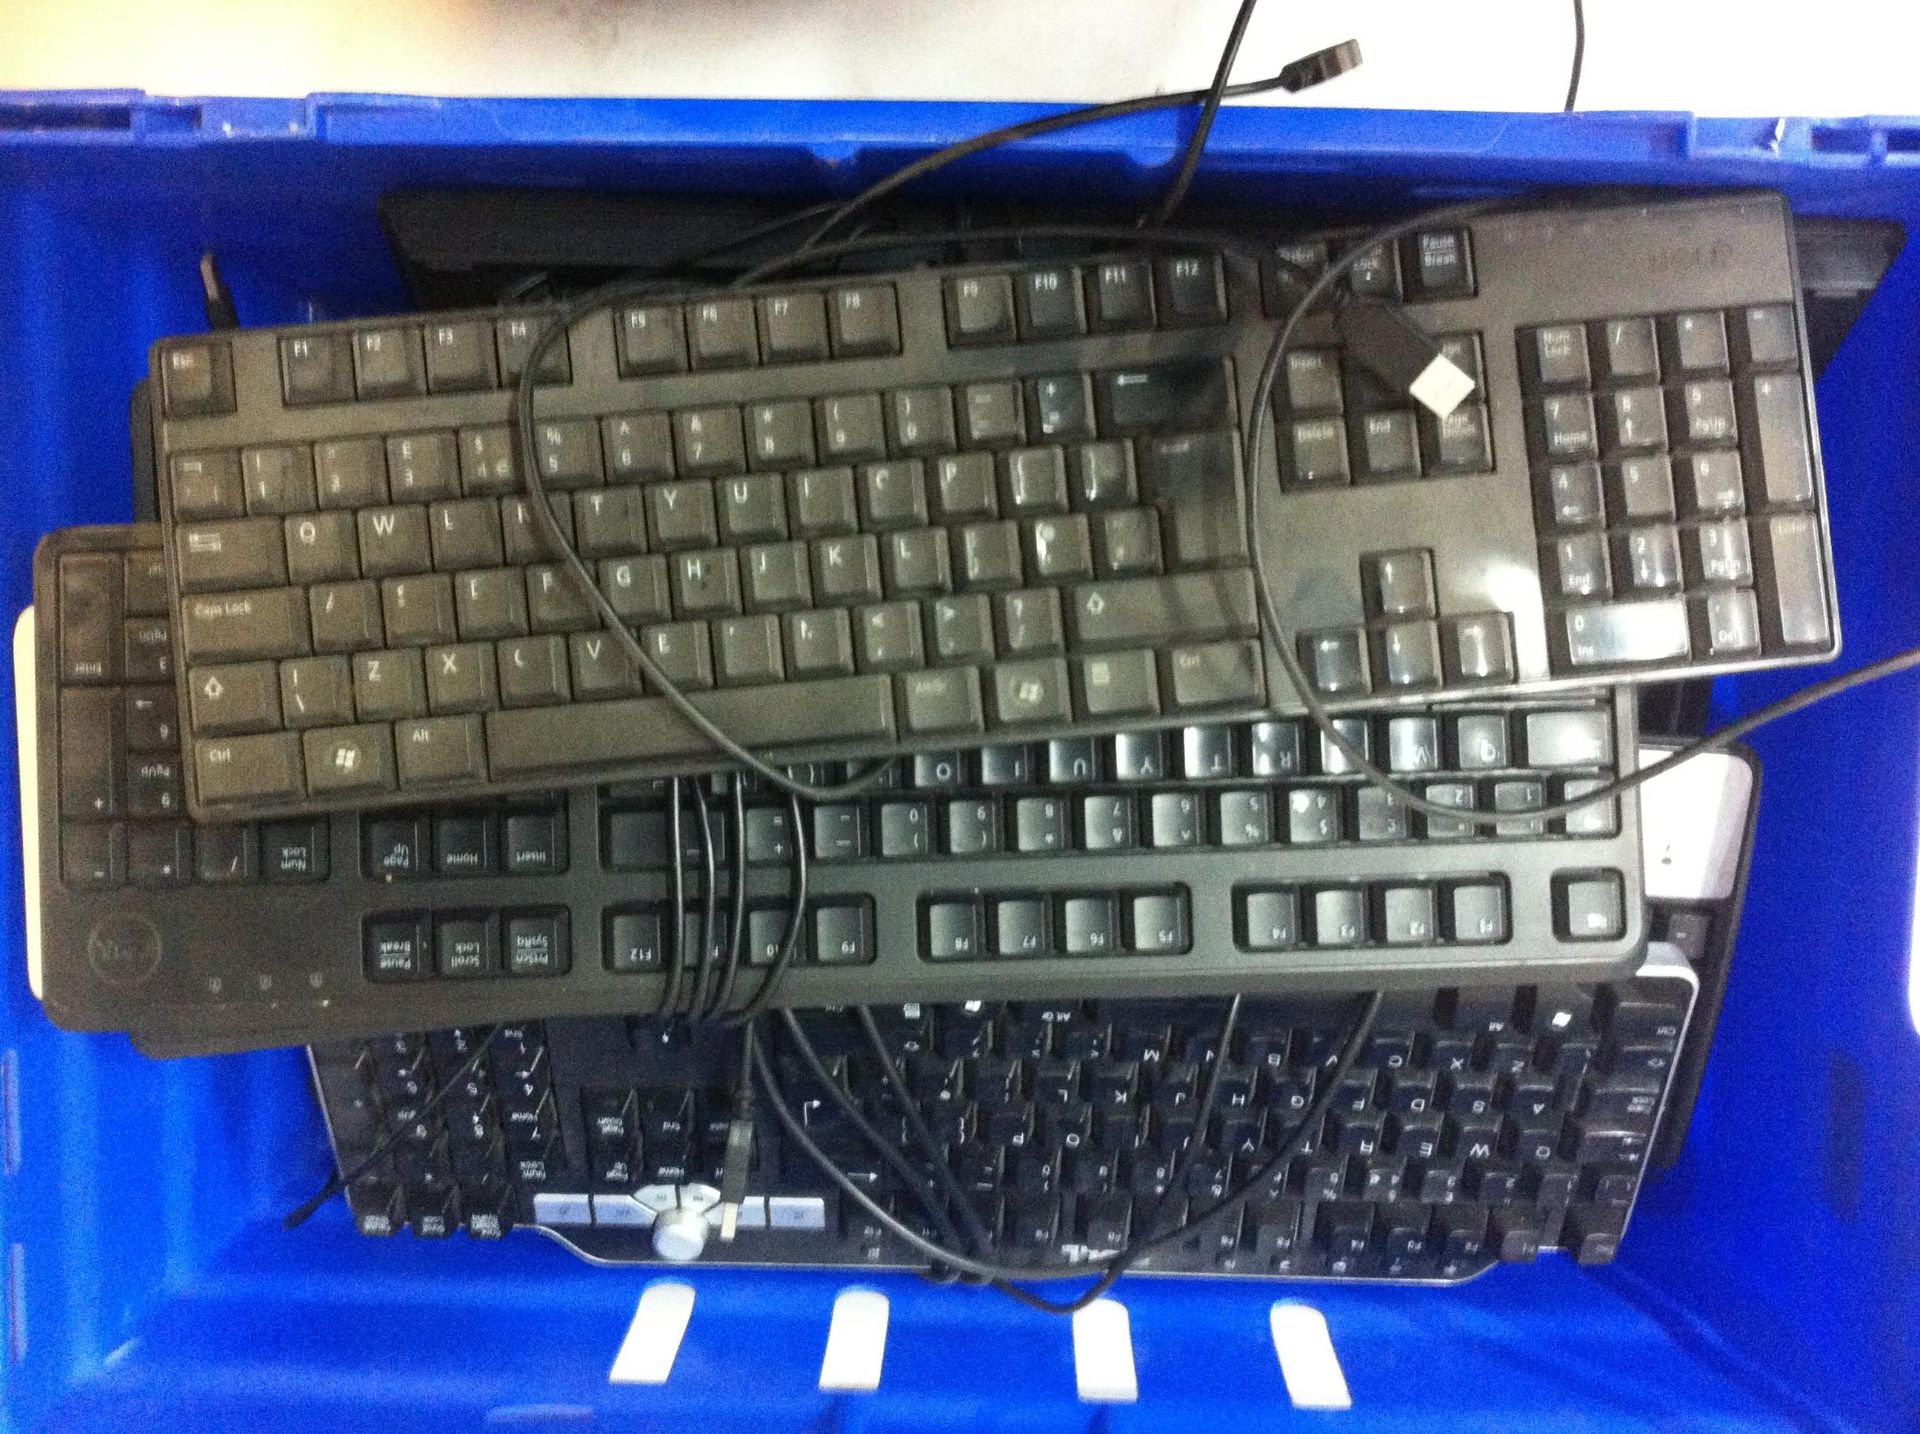 15 x Computer keyboards. See pictures for details